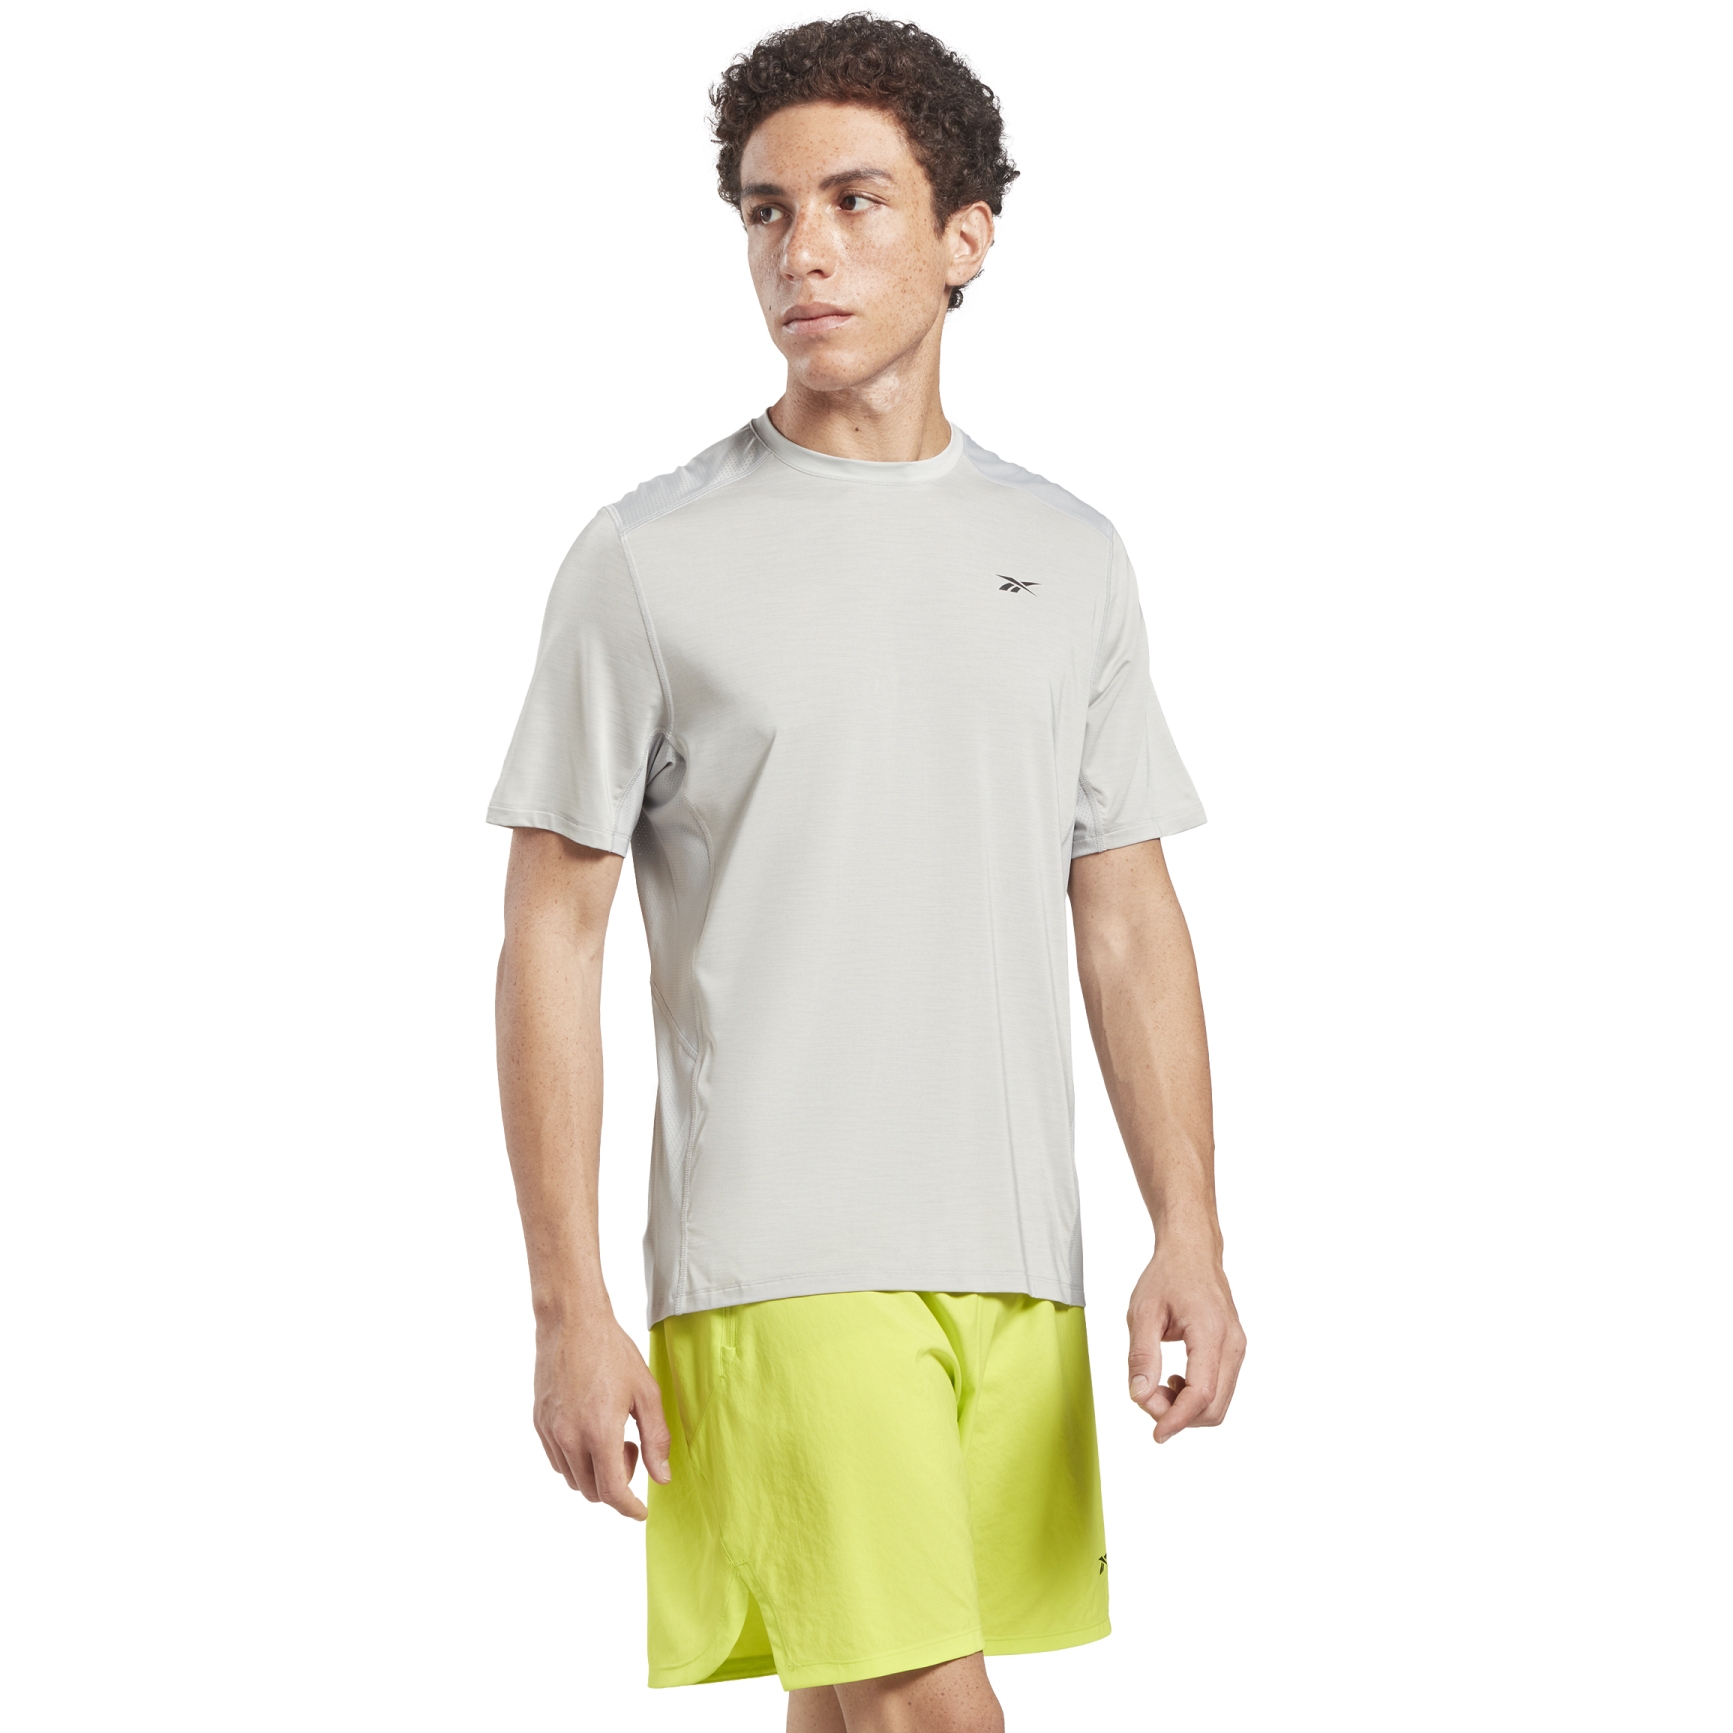 Picture of Reebok TS AC Solid Athlete Tee Men - pure grey